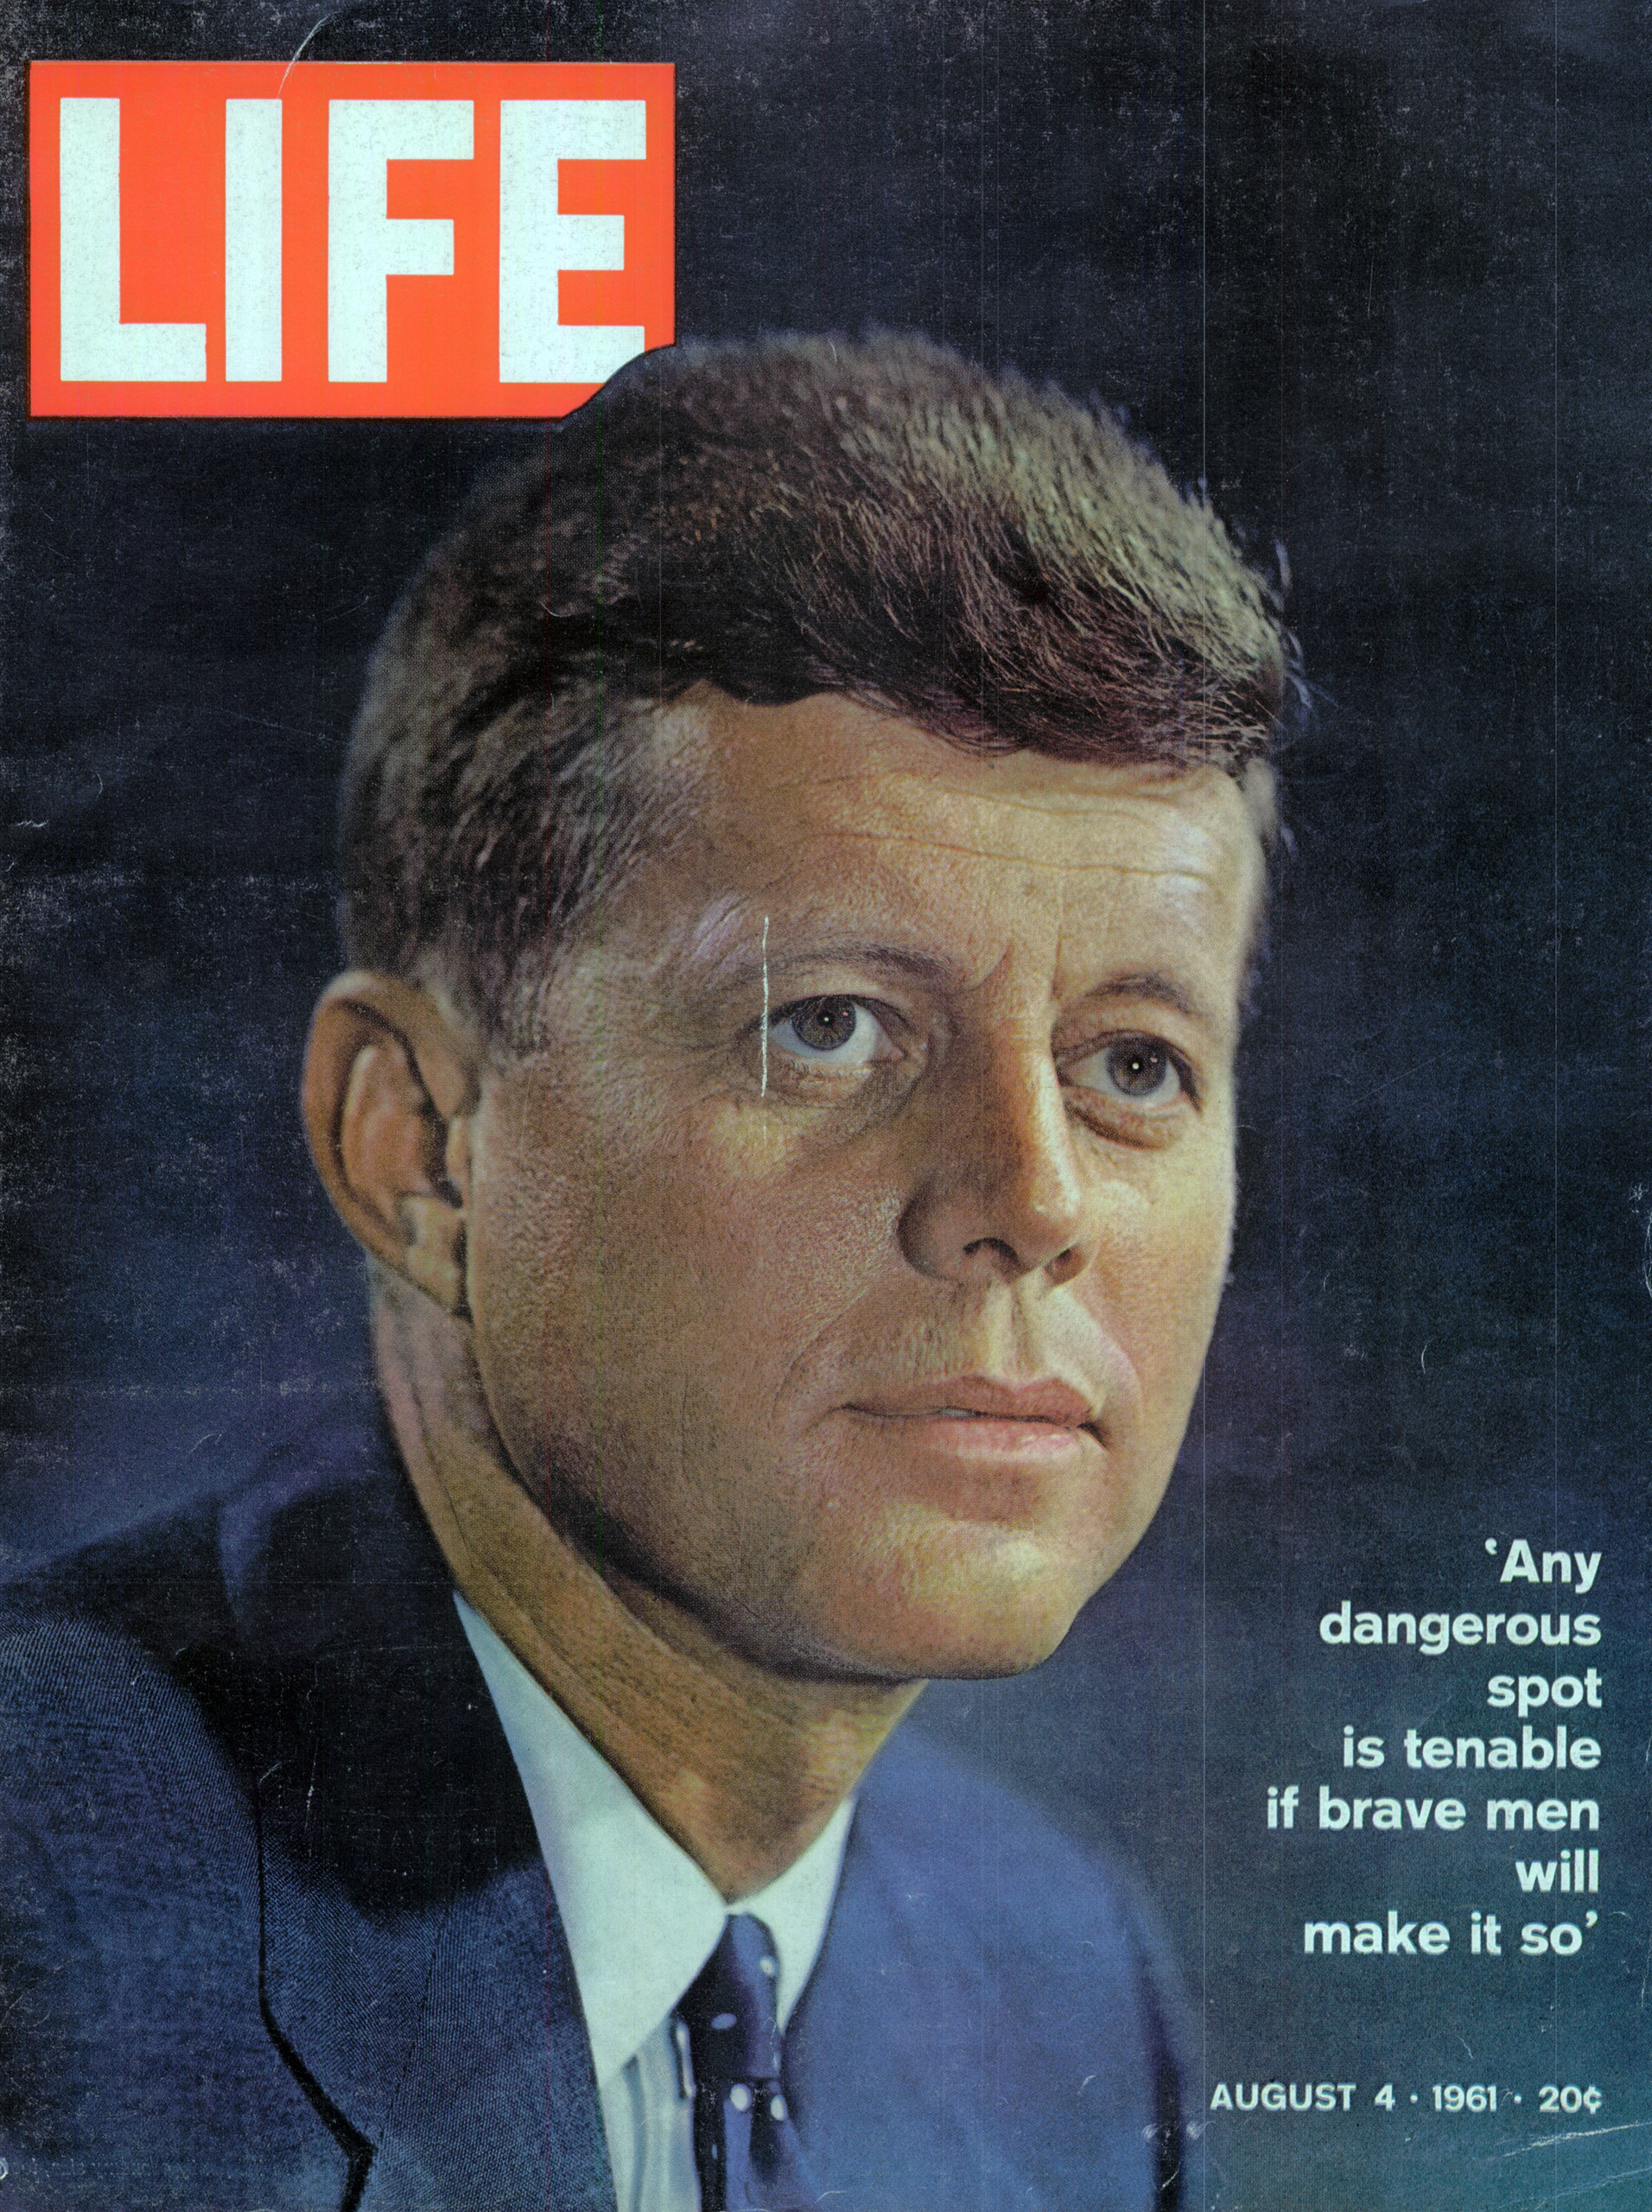 Aug. 4, 1961 cover of LIFE magazine. Cover photo by Karsh.